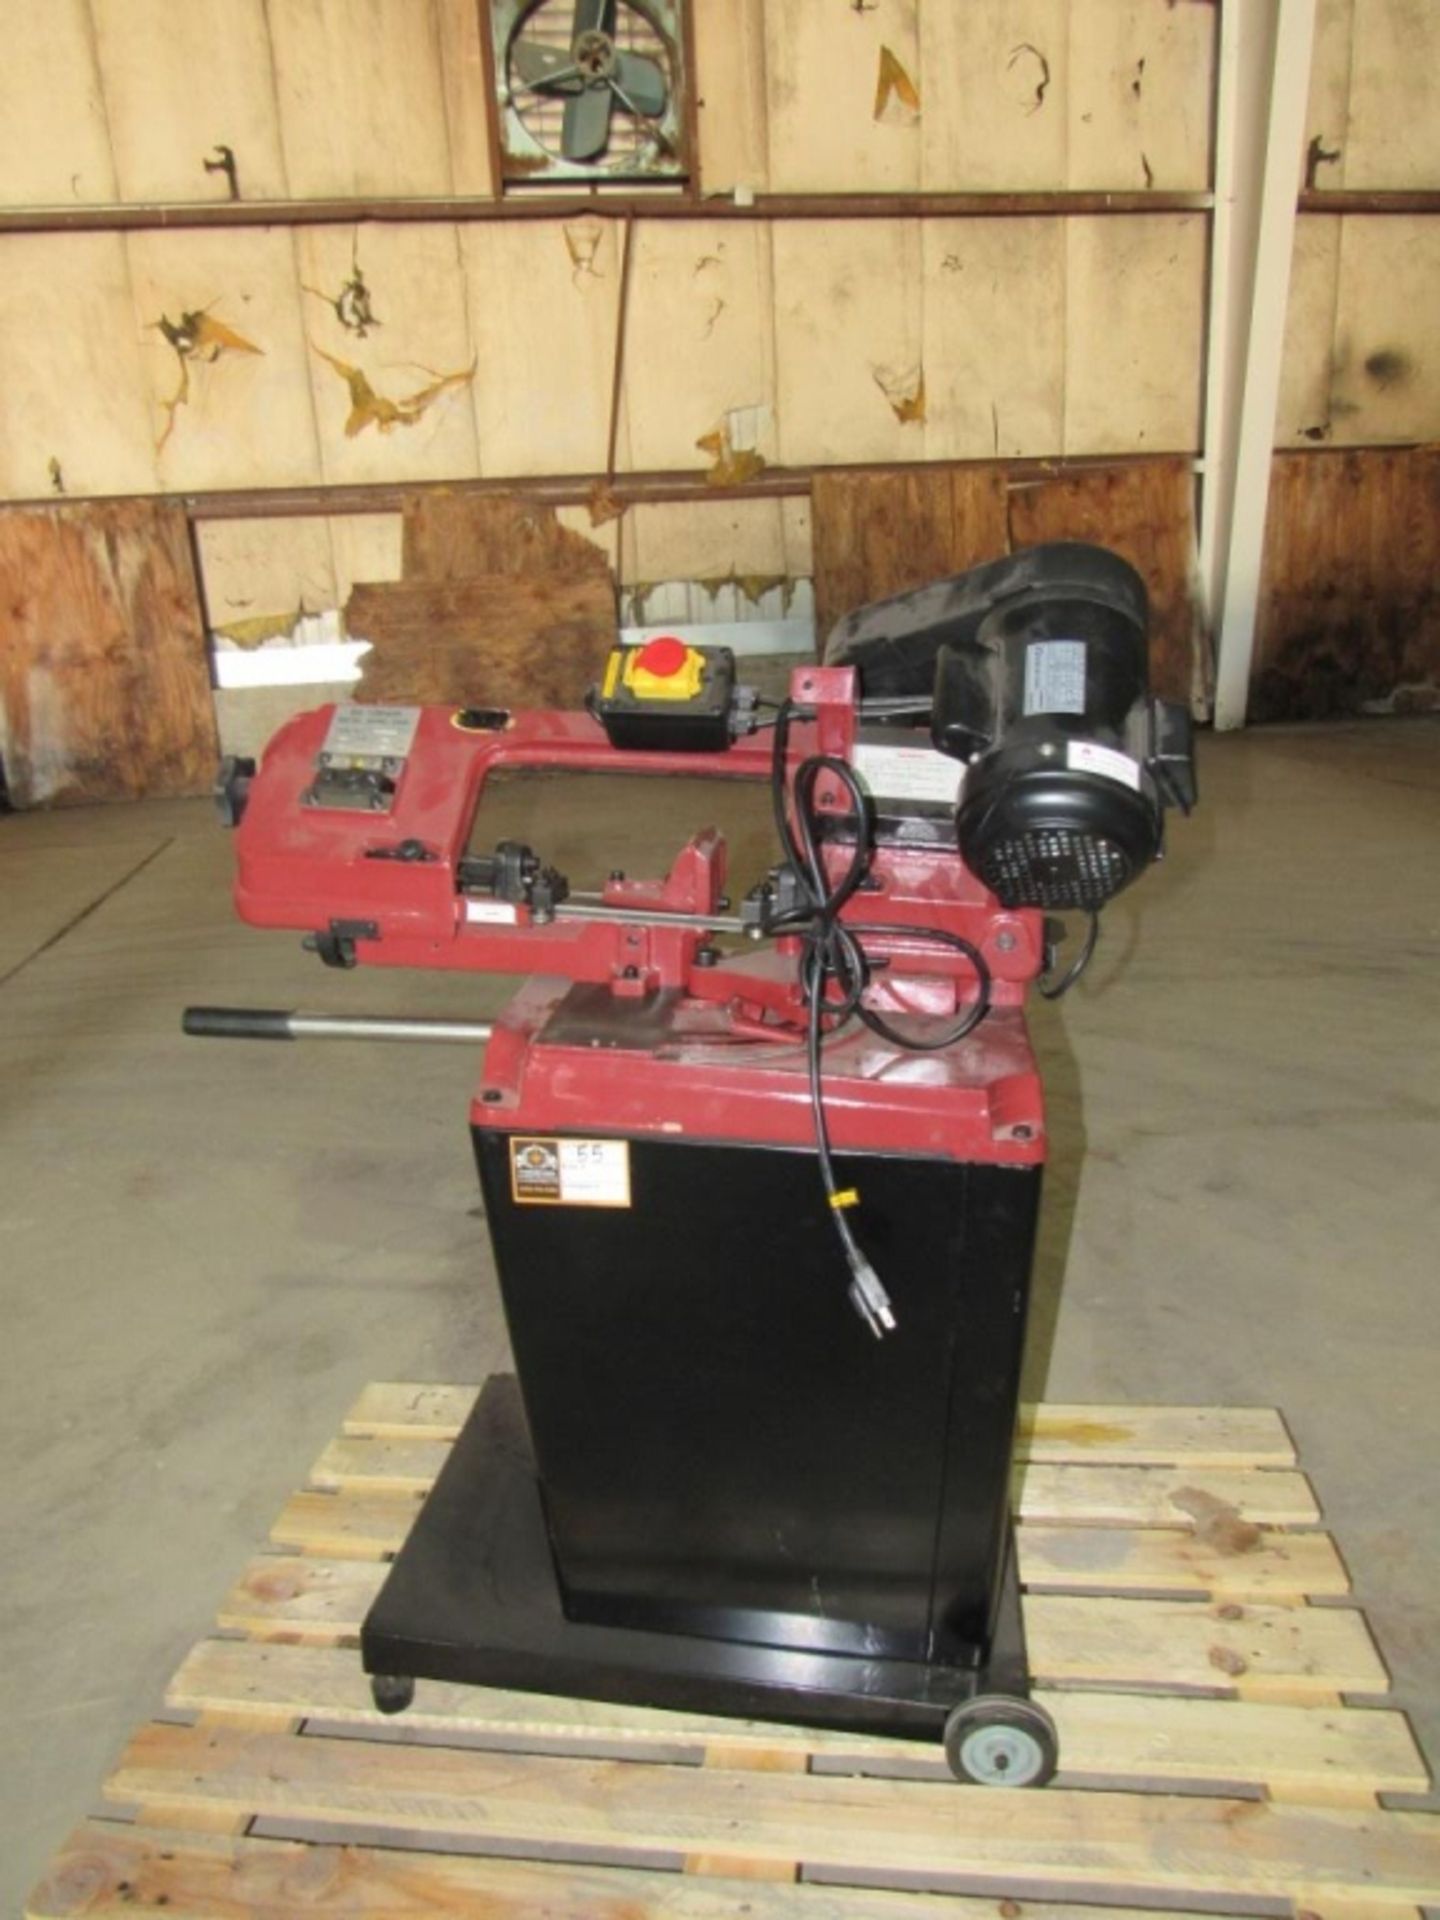 Metal Band Saw- Model - BS-128HDR 0.37 Kw 115 Volts 1 Phase 60 Hz Overall Dimensions - 3' x 20" x - Image 2 of 9